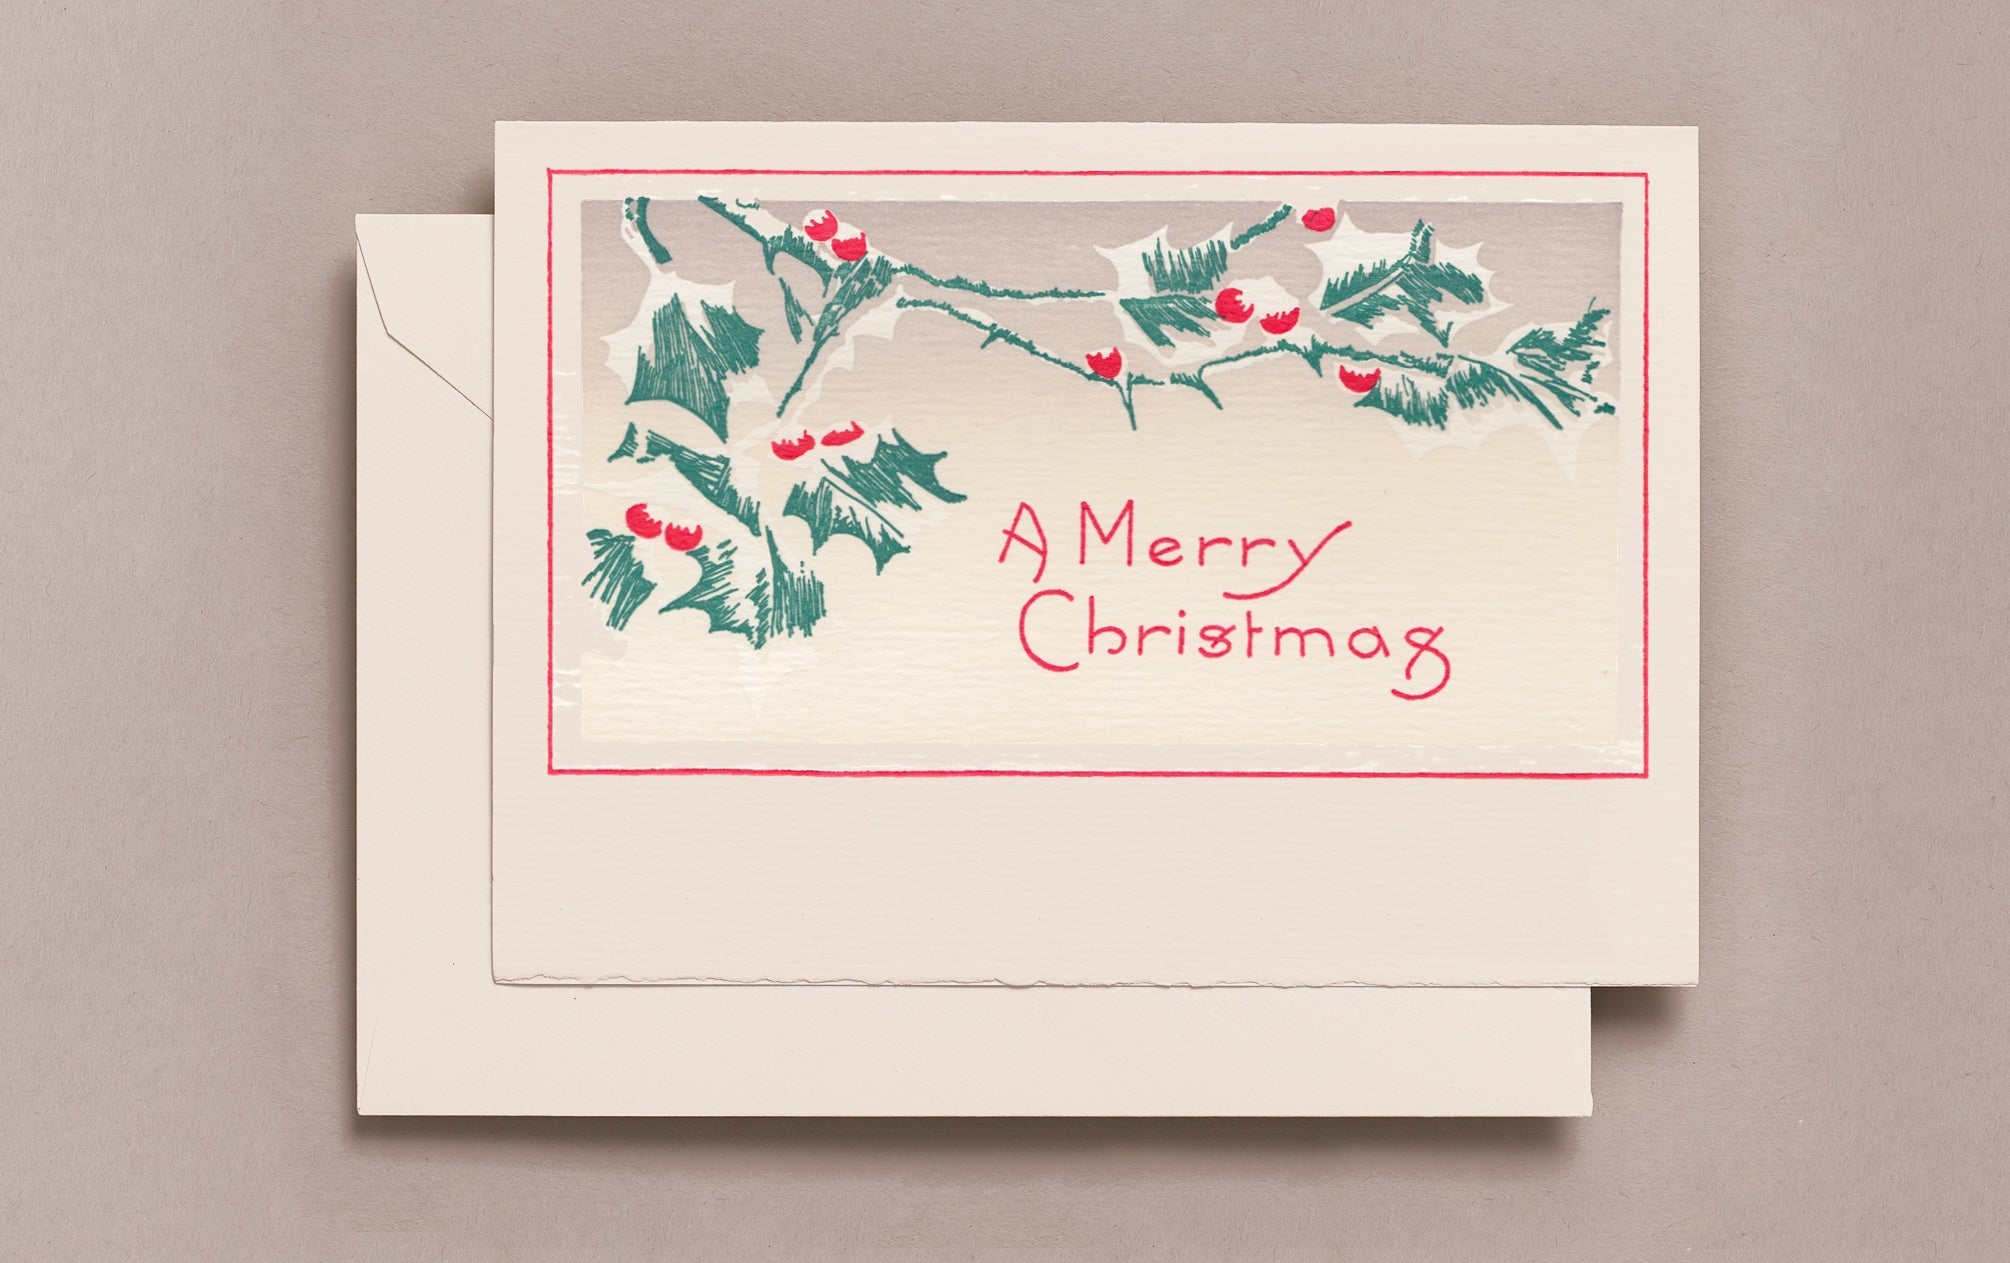 Letterpress Berries in the Snow Christmas Card